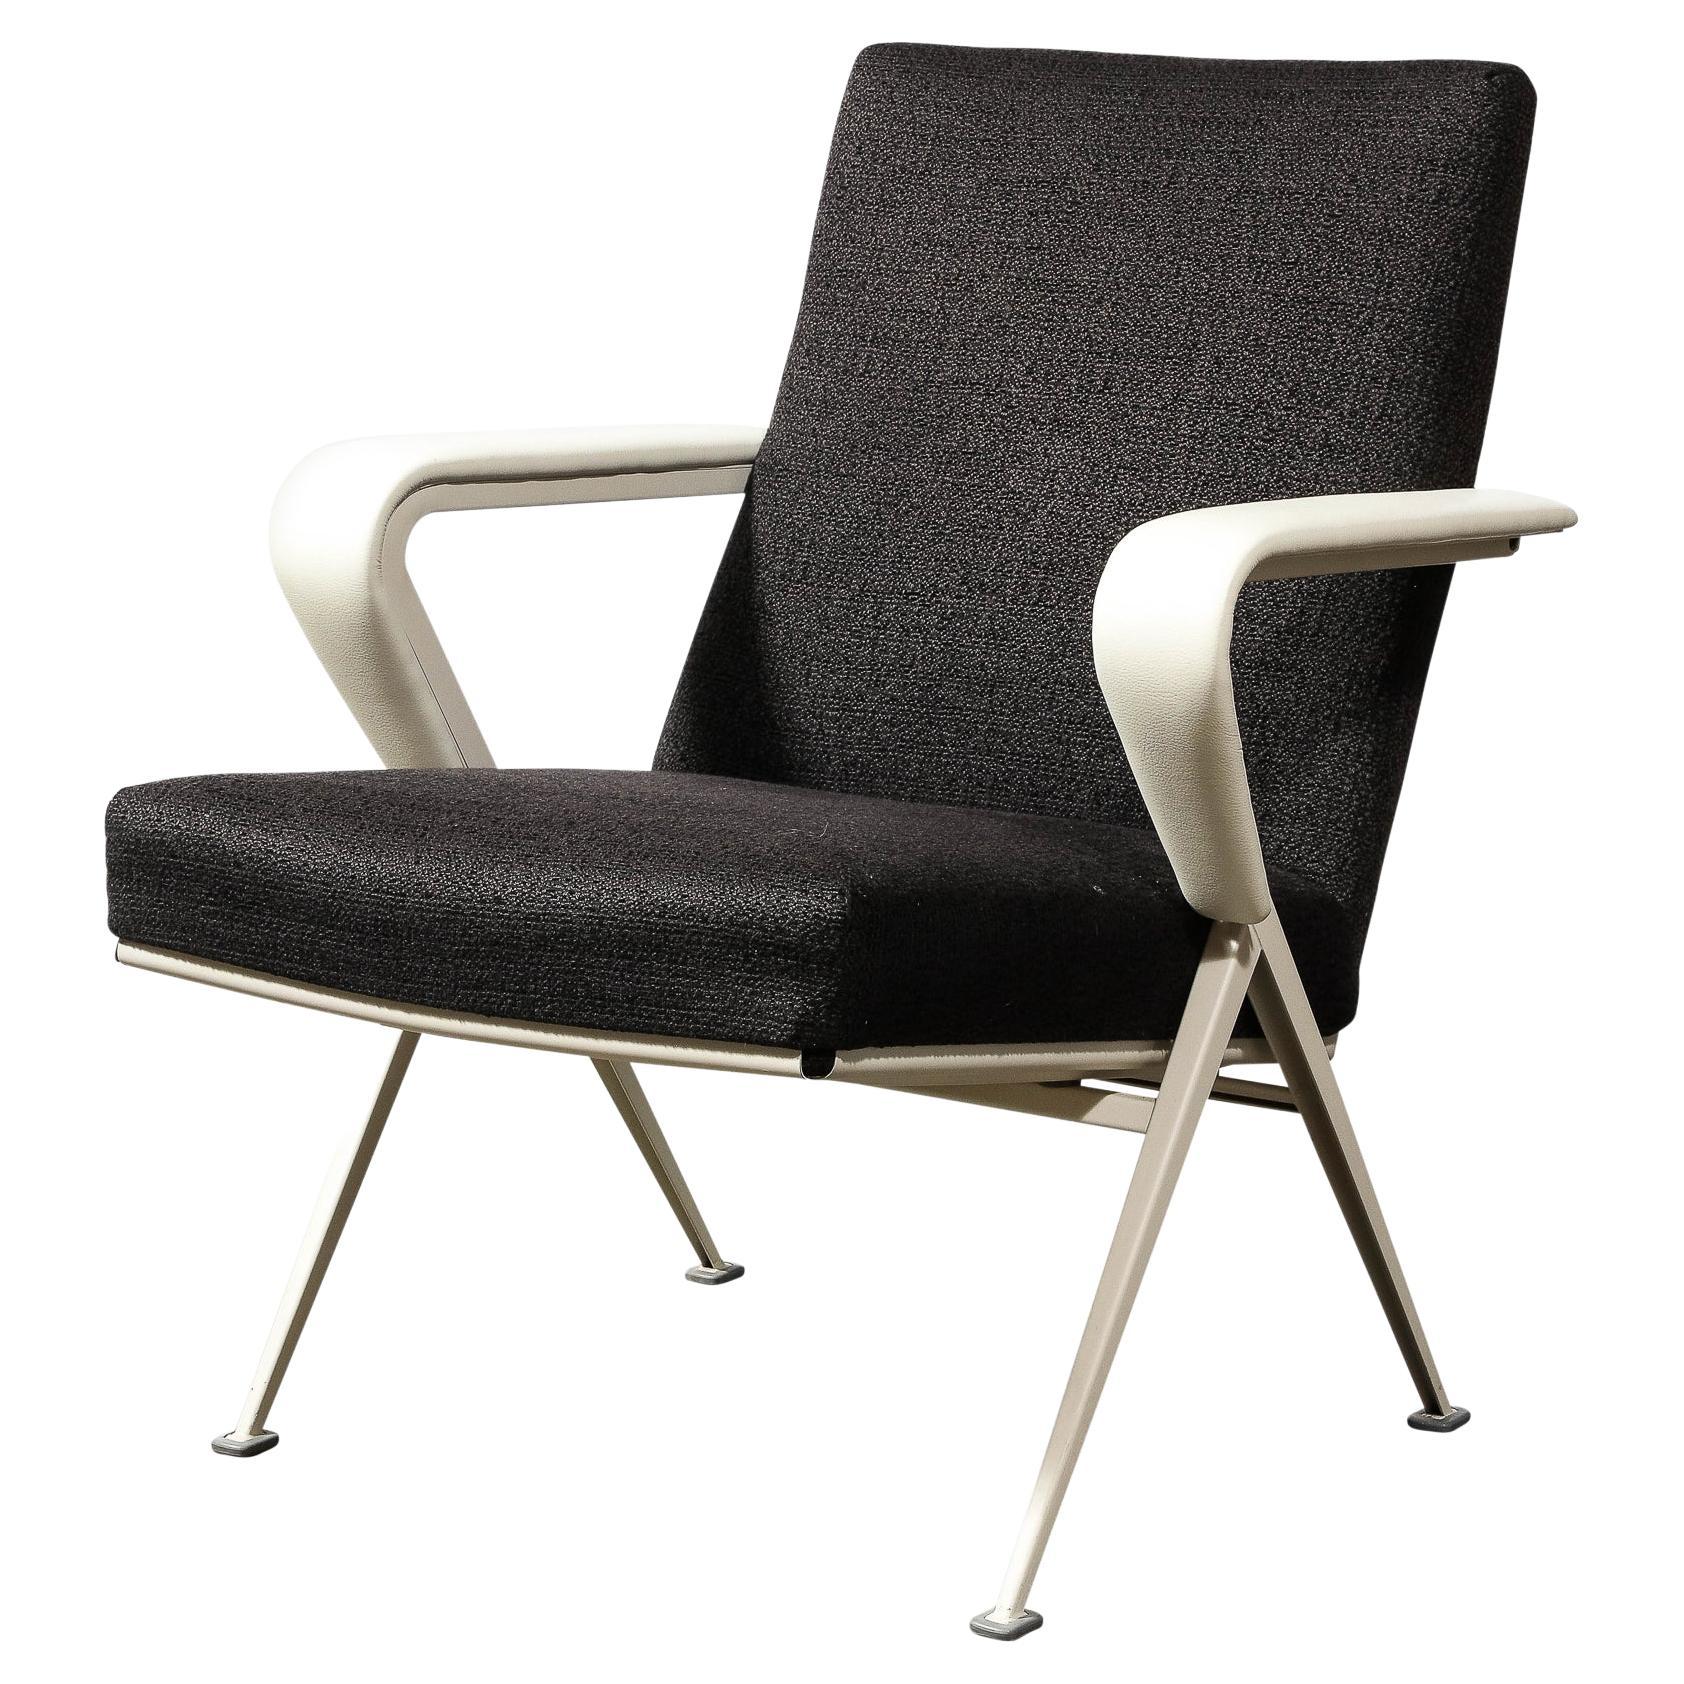 This sophisticated pair of Mid Century Modern repose chairs were realized in the Netherlands circa 1960. They feature angular compass style legs with round feet in enameled steel and sculptural v-form arms with rounded interior angles clad in luxe